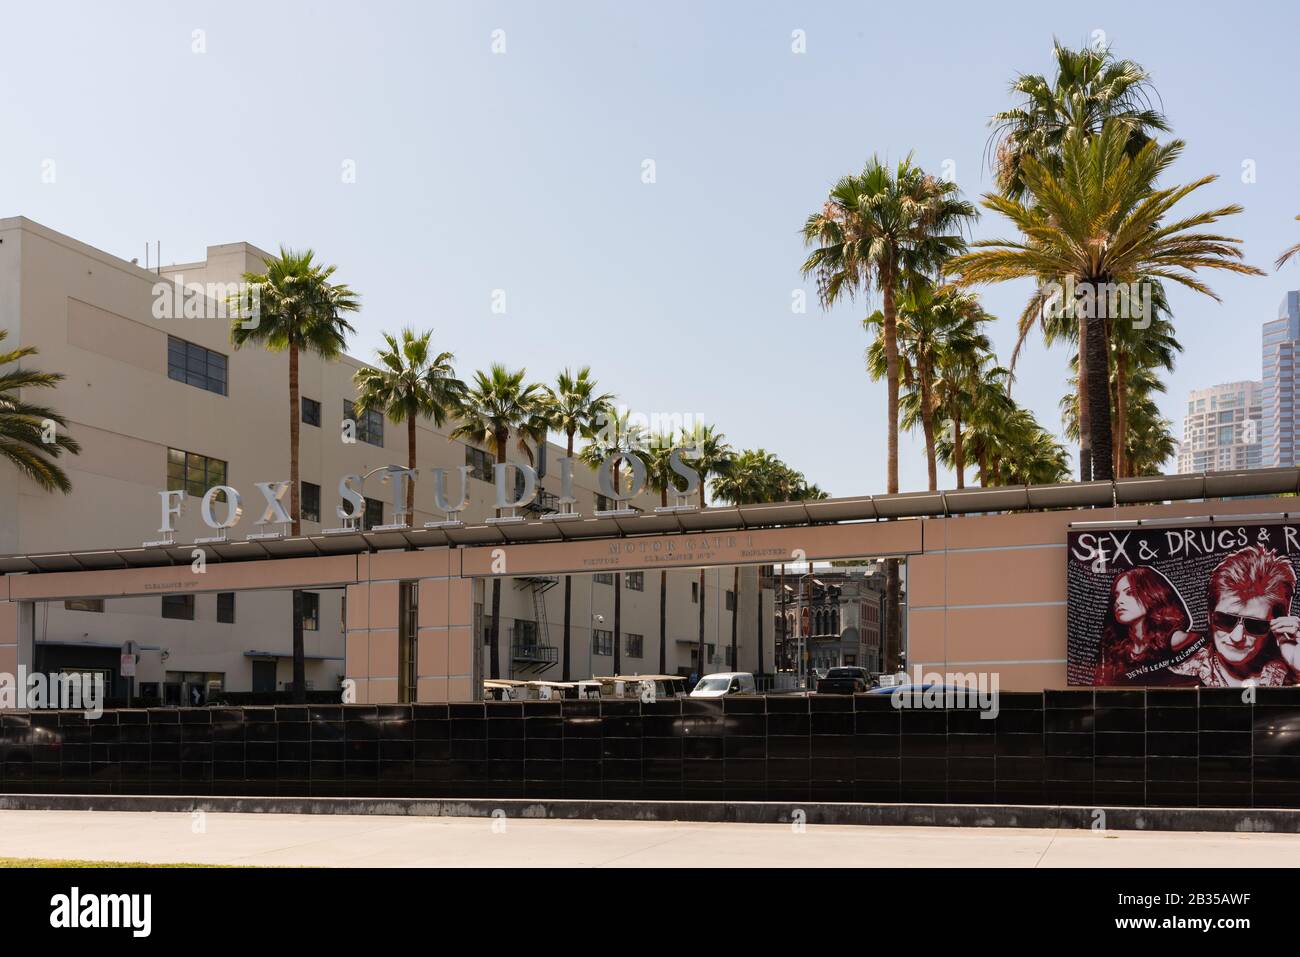 The entrance to Fox Studios in Century City, California where many famous movies and television shows have been created. Stock Photo